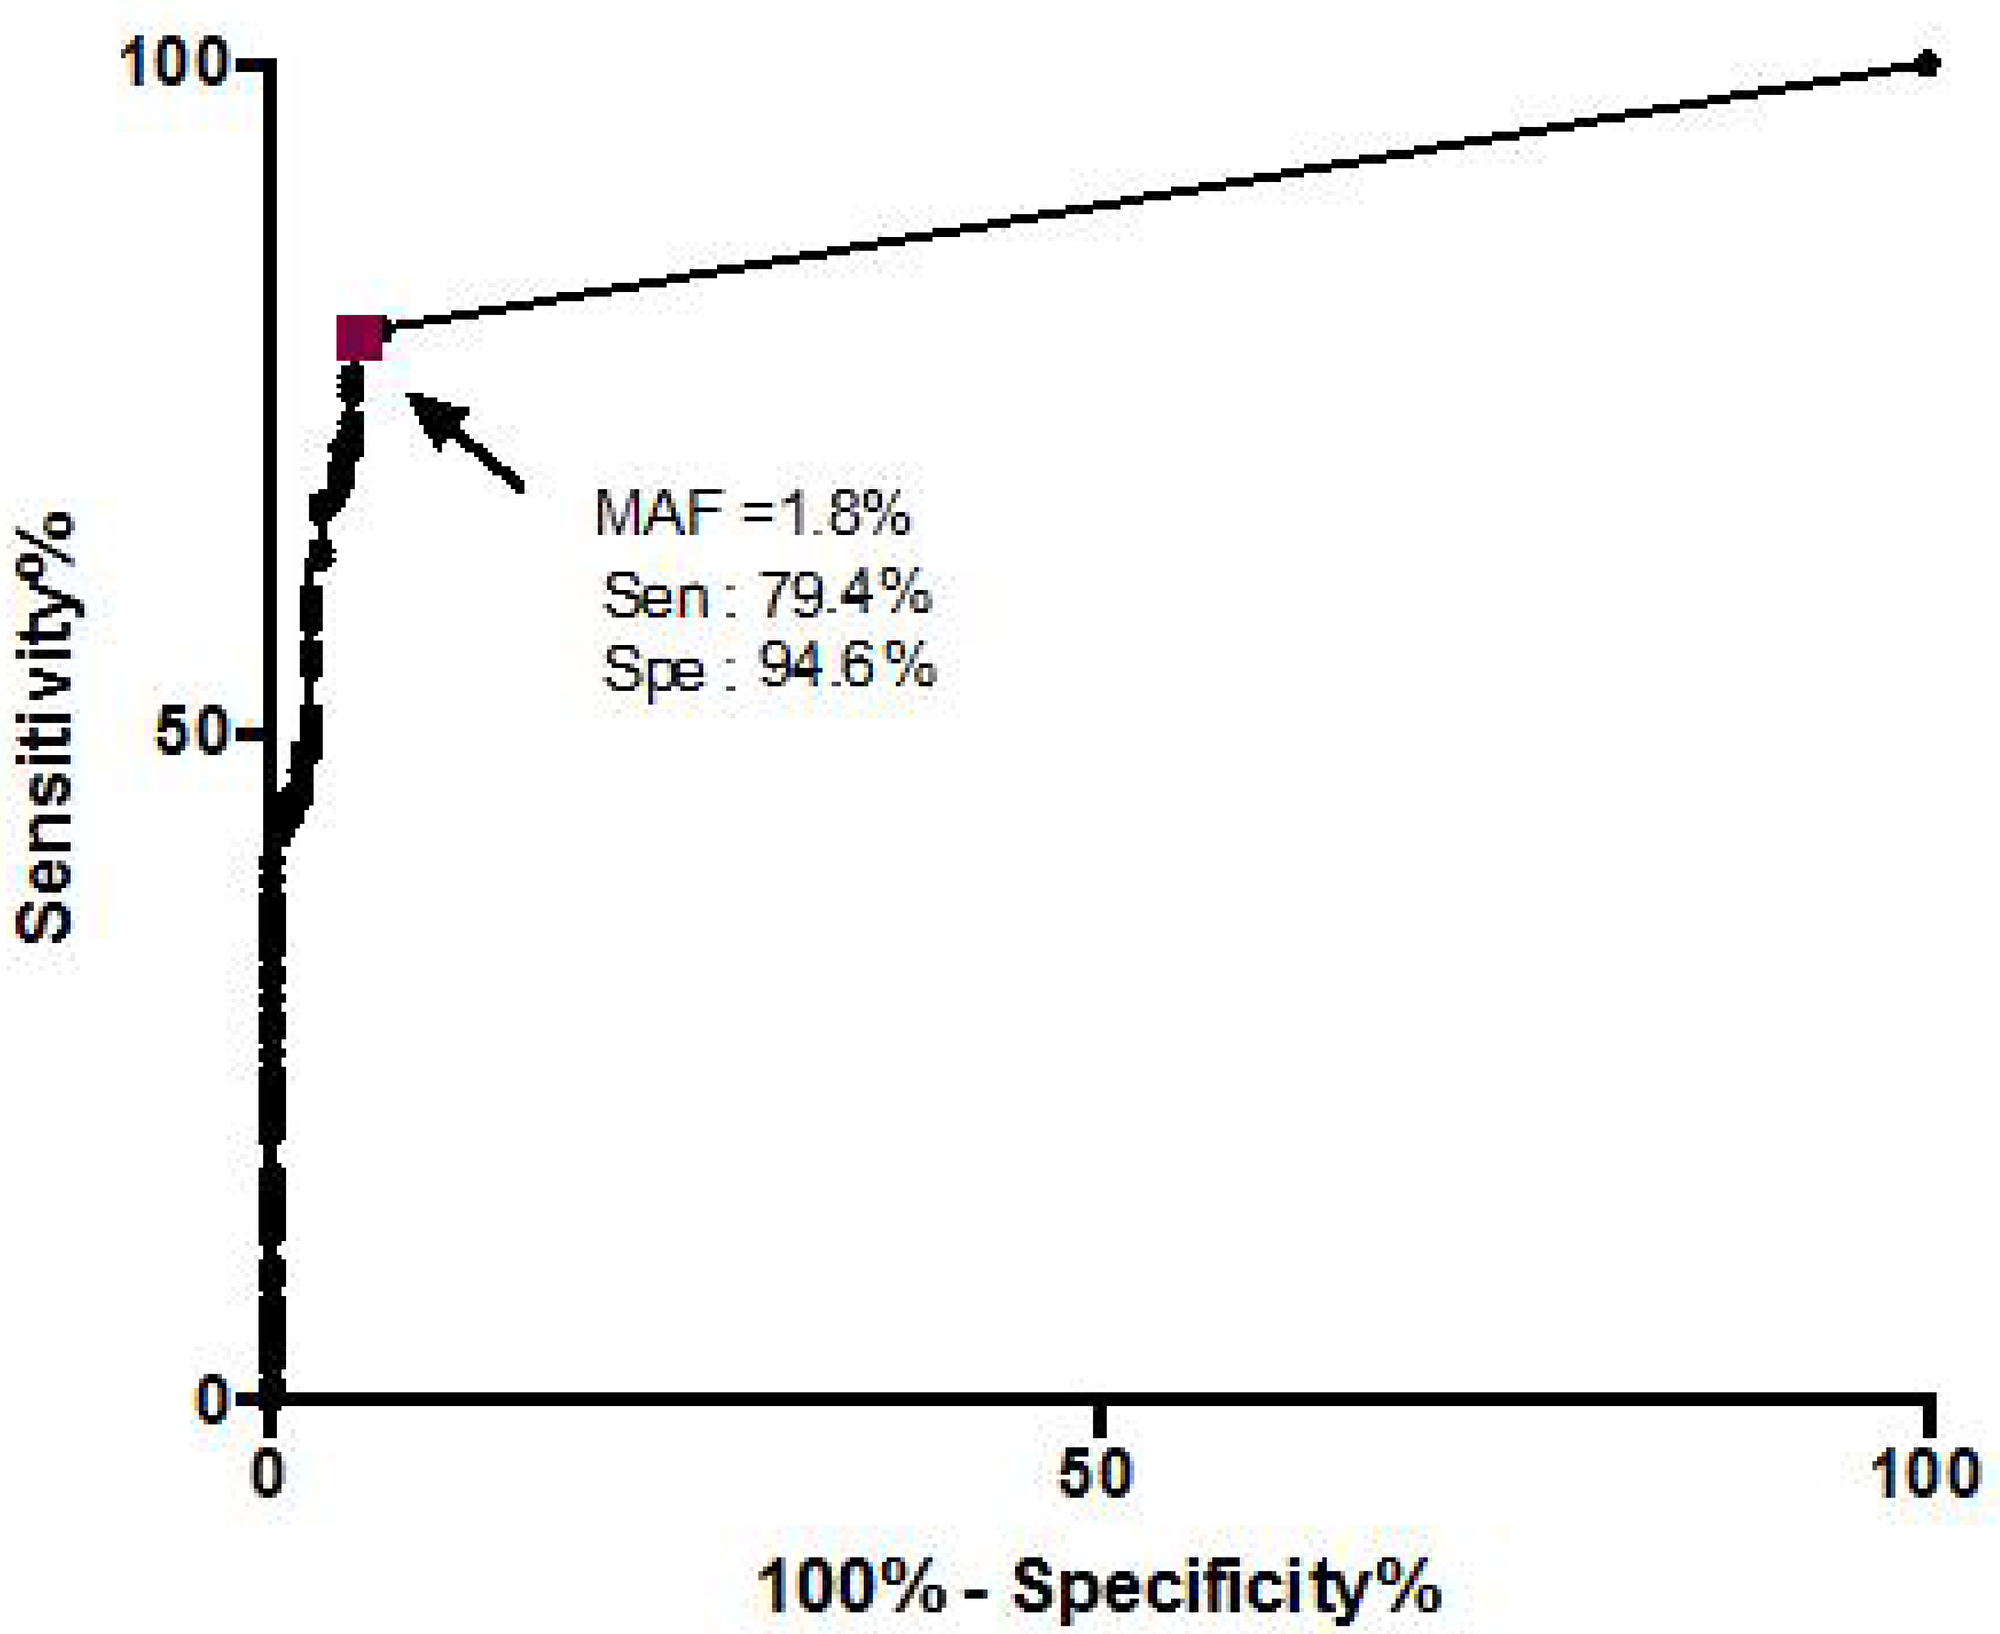 Receiver operating characteristic (ROC) curve plotted with KRAS mutation allele frequency (MAF) in pancreatic cystic lesions classified as either mucinous or non-mucinous based on the clinical algorithm.